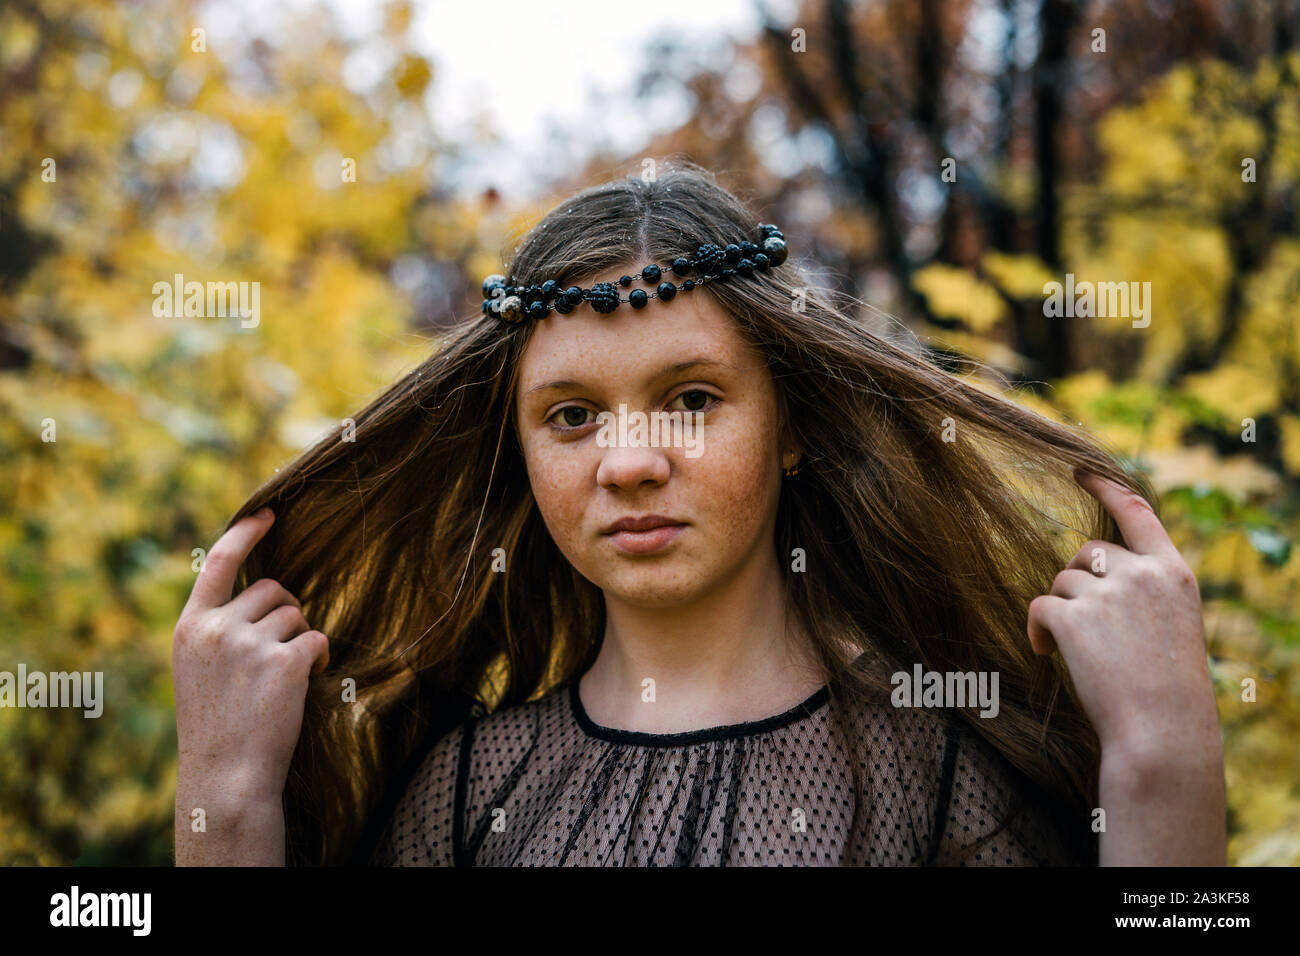 Freckled redhead girl in autunno parco giallo Foto Stock